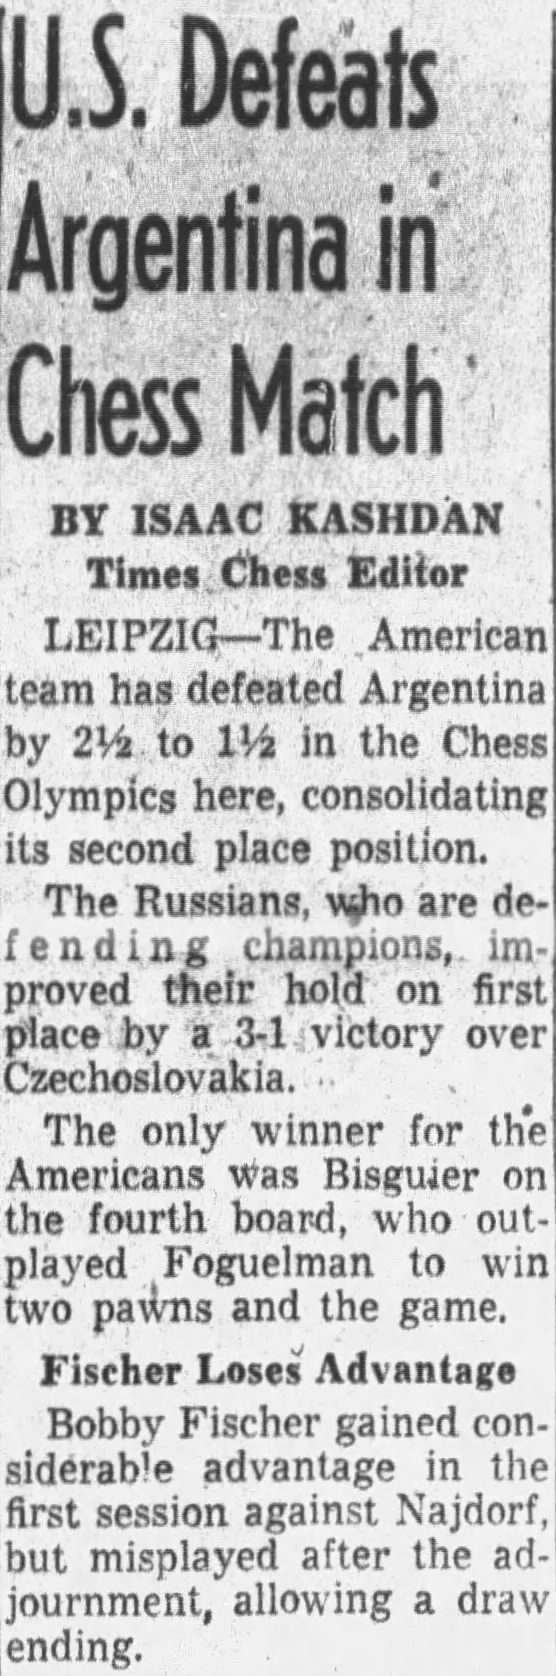 U.S. Defeats Argentina in Chess Match